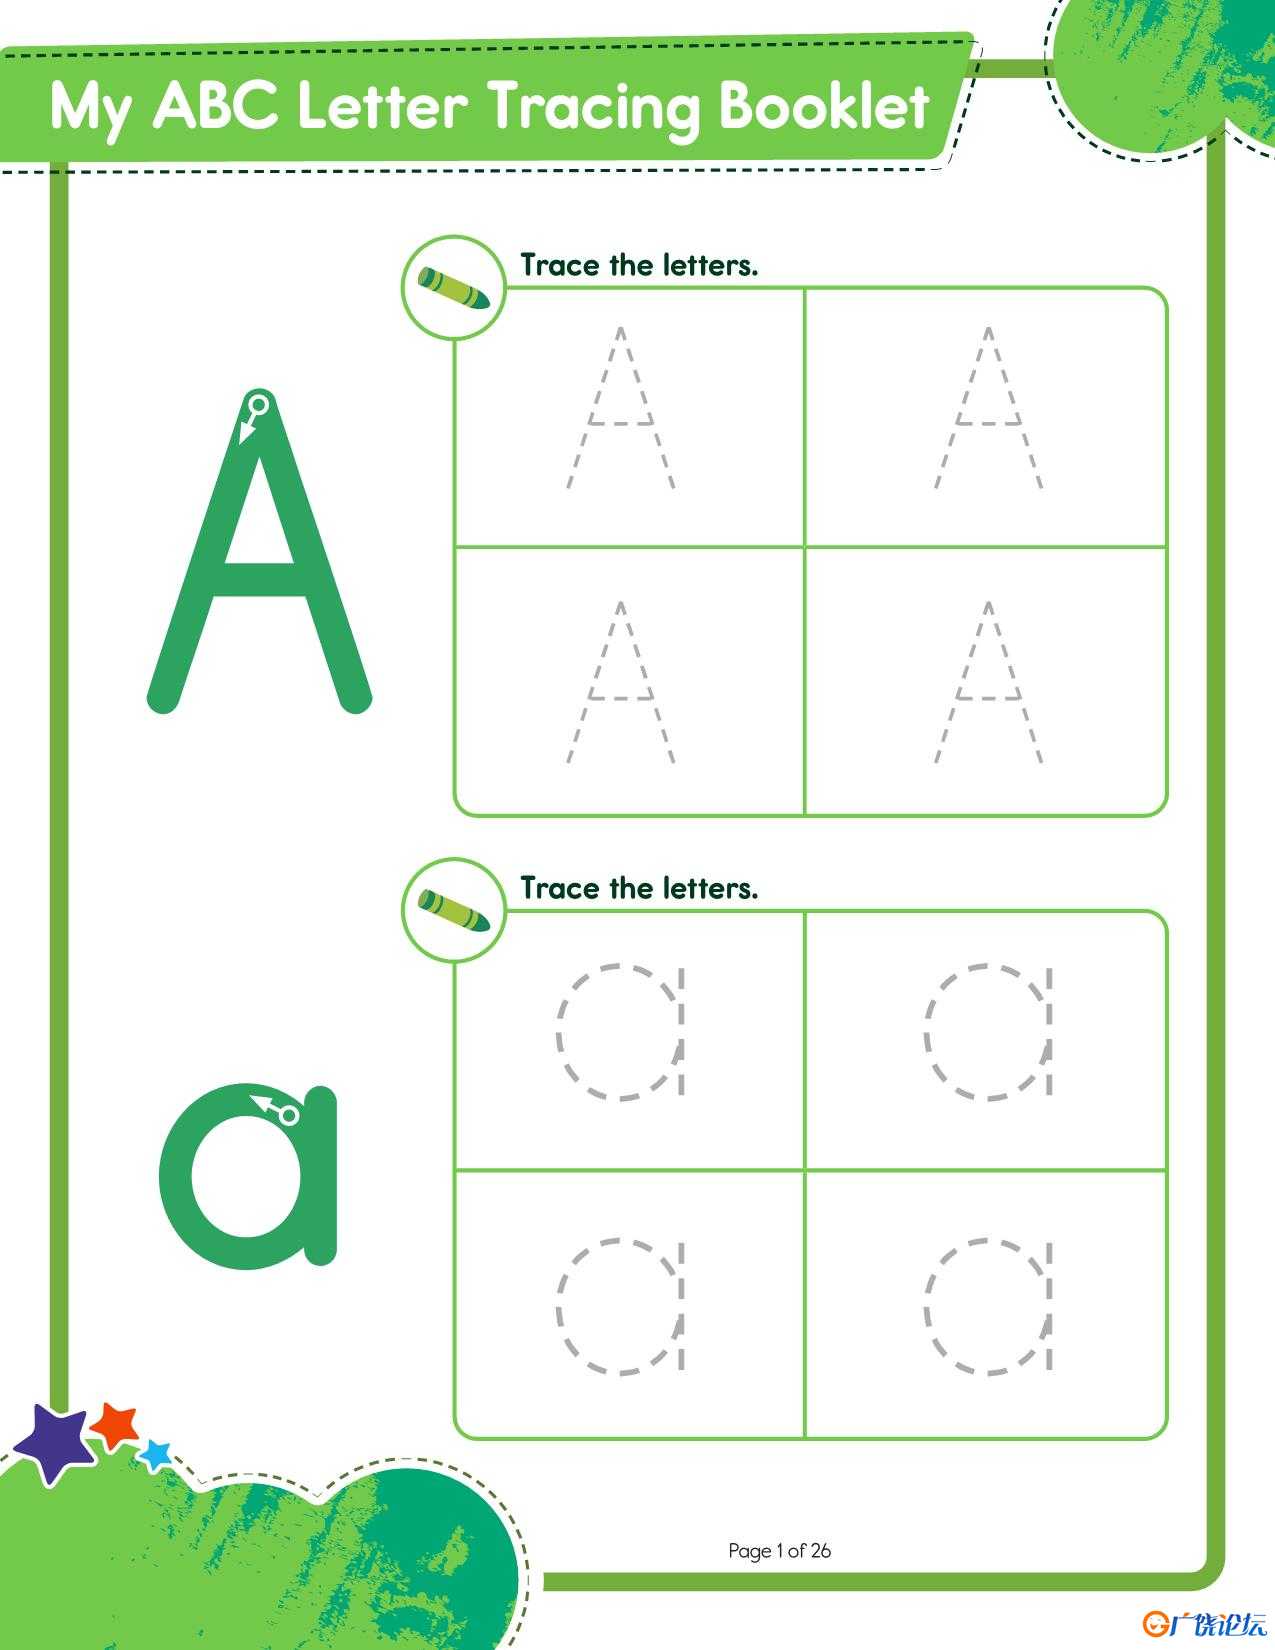 abc-letter-tracing-booklet-us 27页PDF